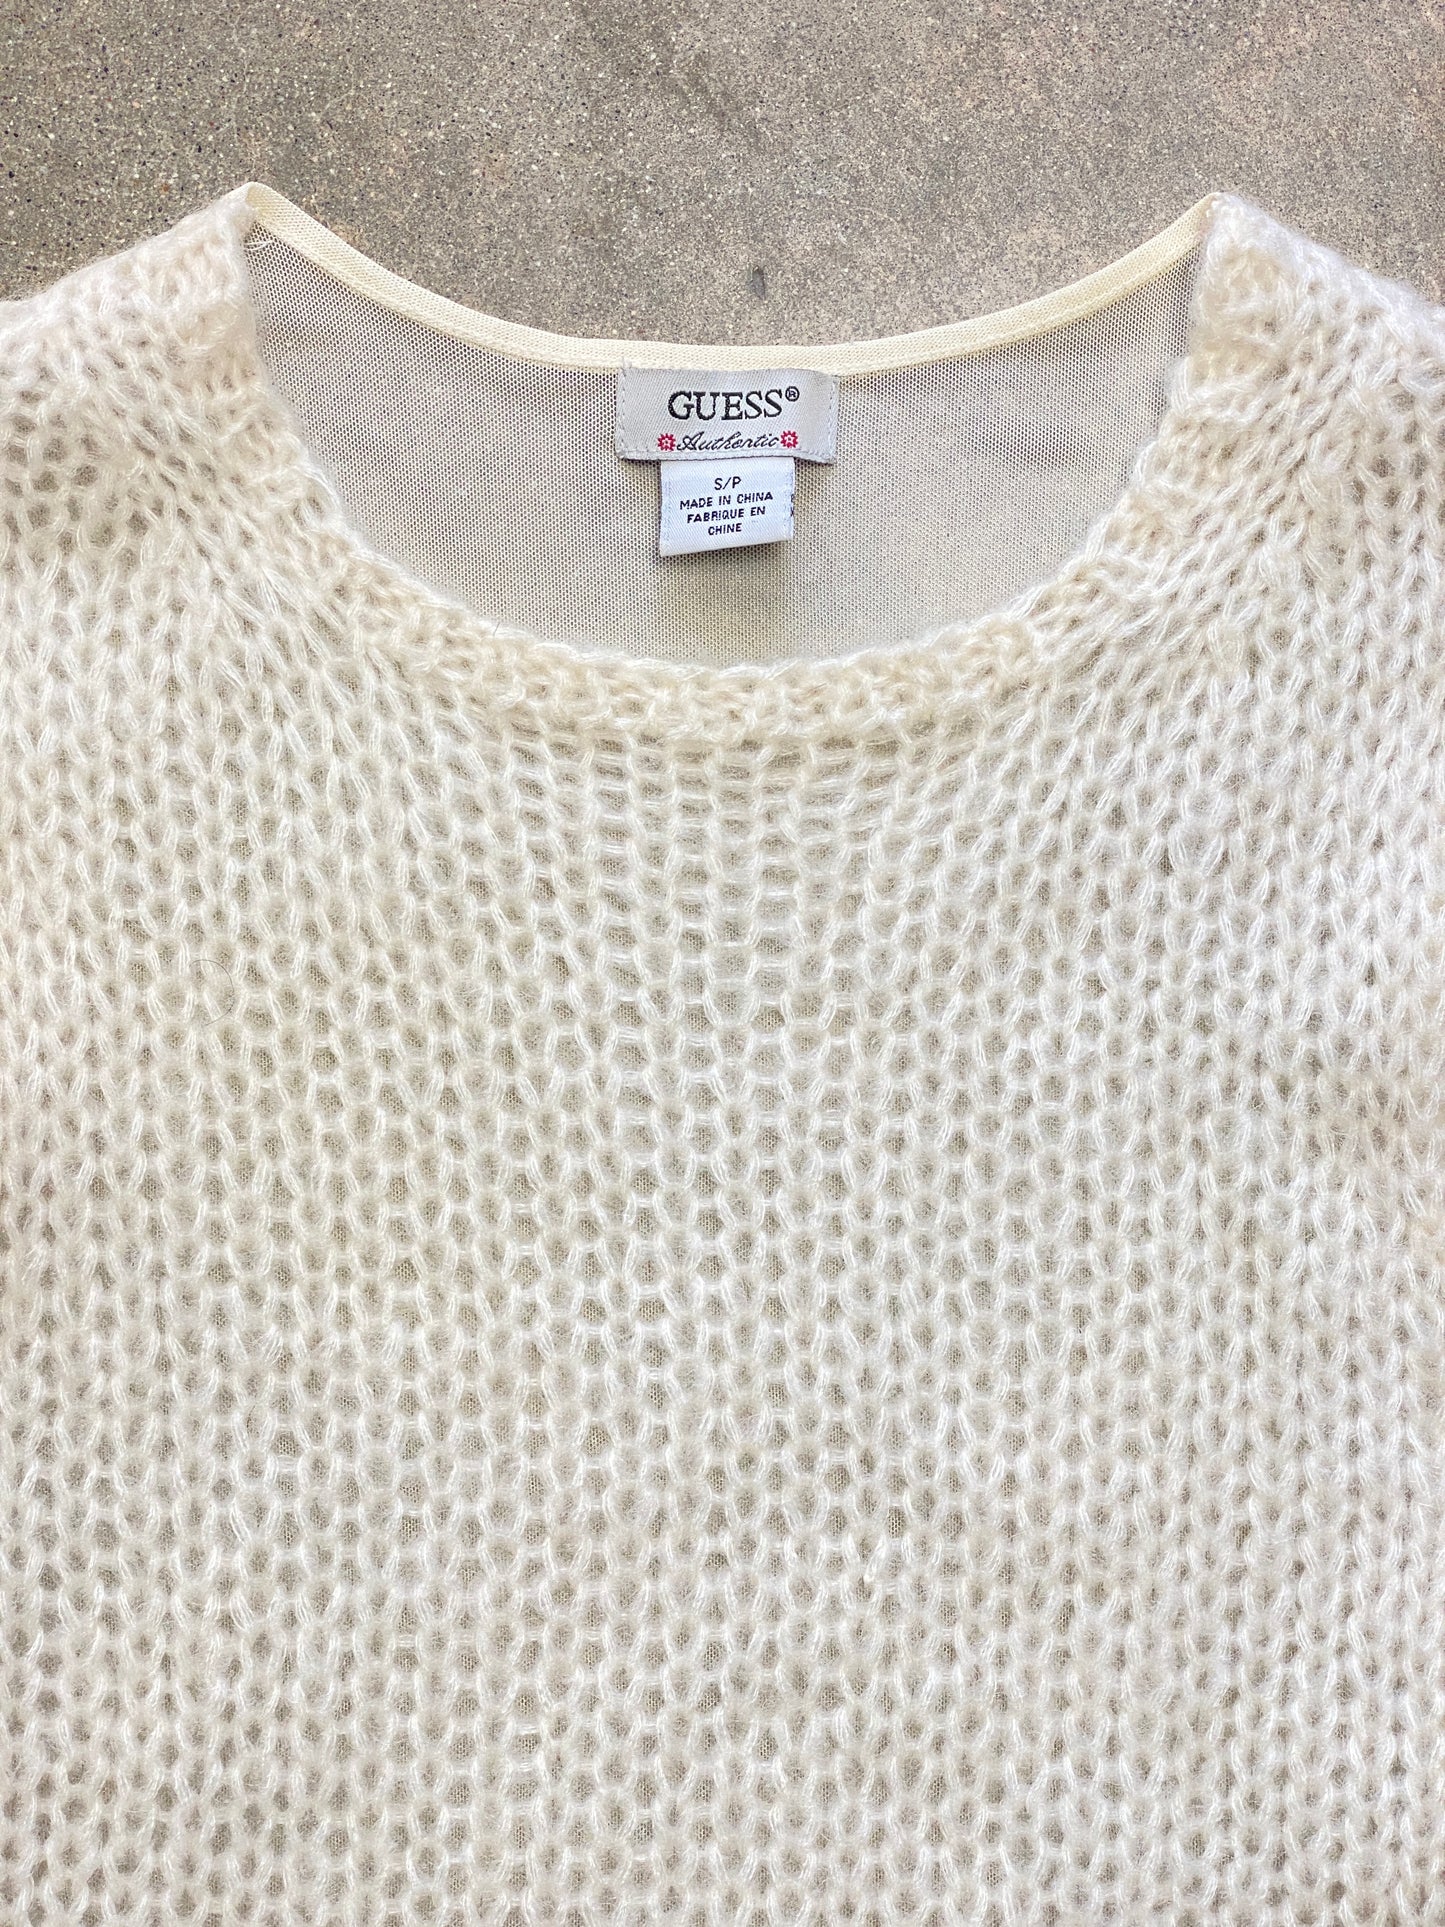 00’s Guess Cream Knit Tank Top